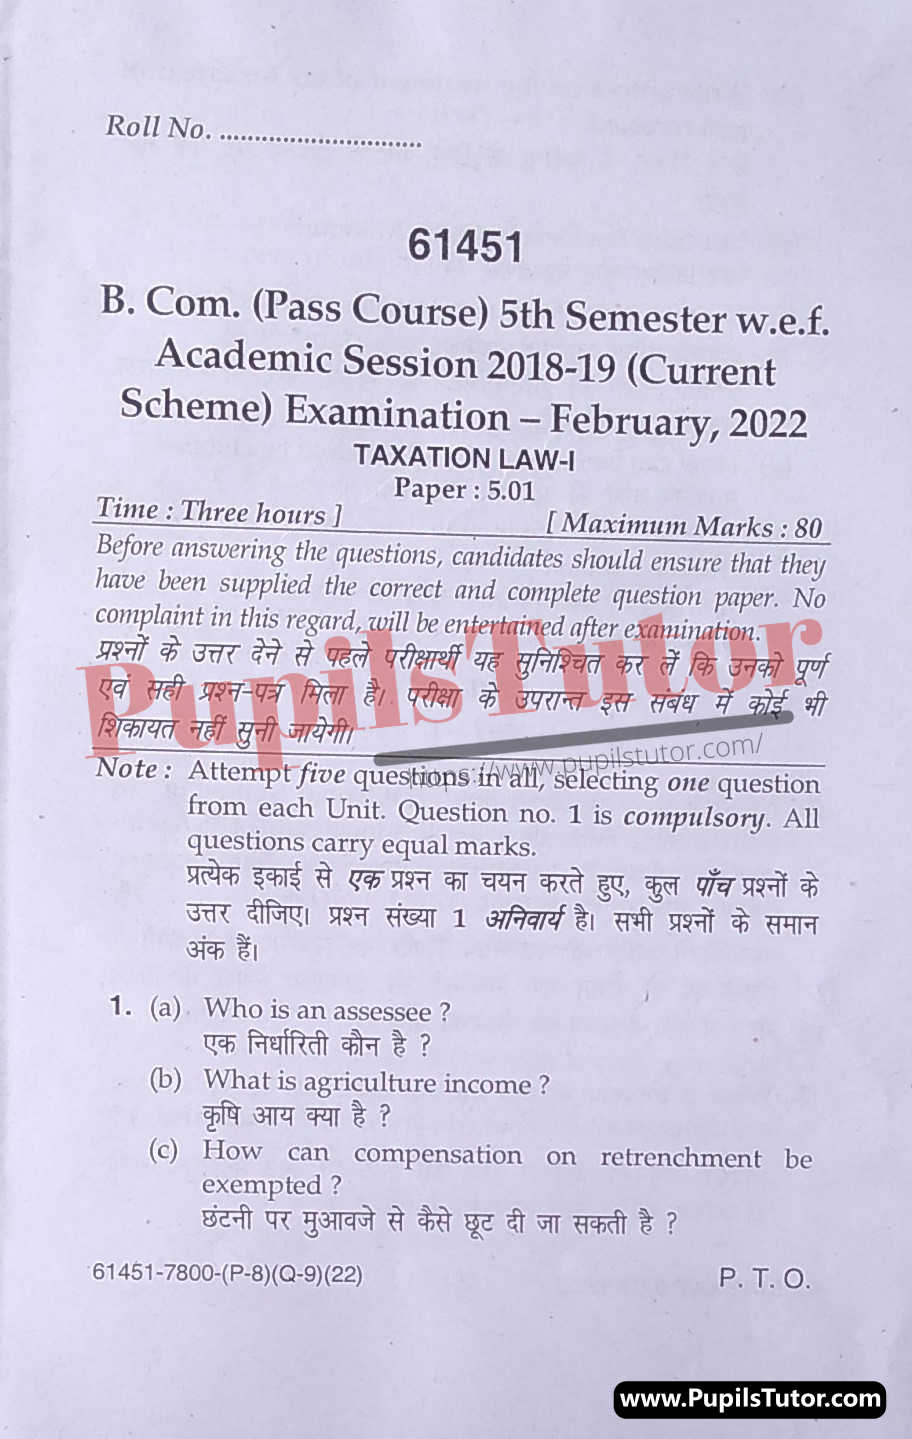 MDU (Maharshi Dayanand University, Rohtak Haryana) Bcom Pass Course 5th Semester Previous Year Taxation Law Question Paper For February, 2022 Exam (Question Paper Page 1) - pupilstutor.com